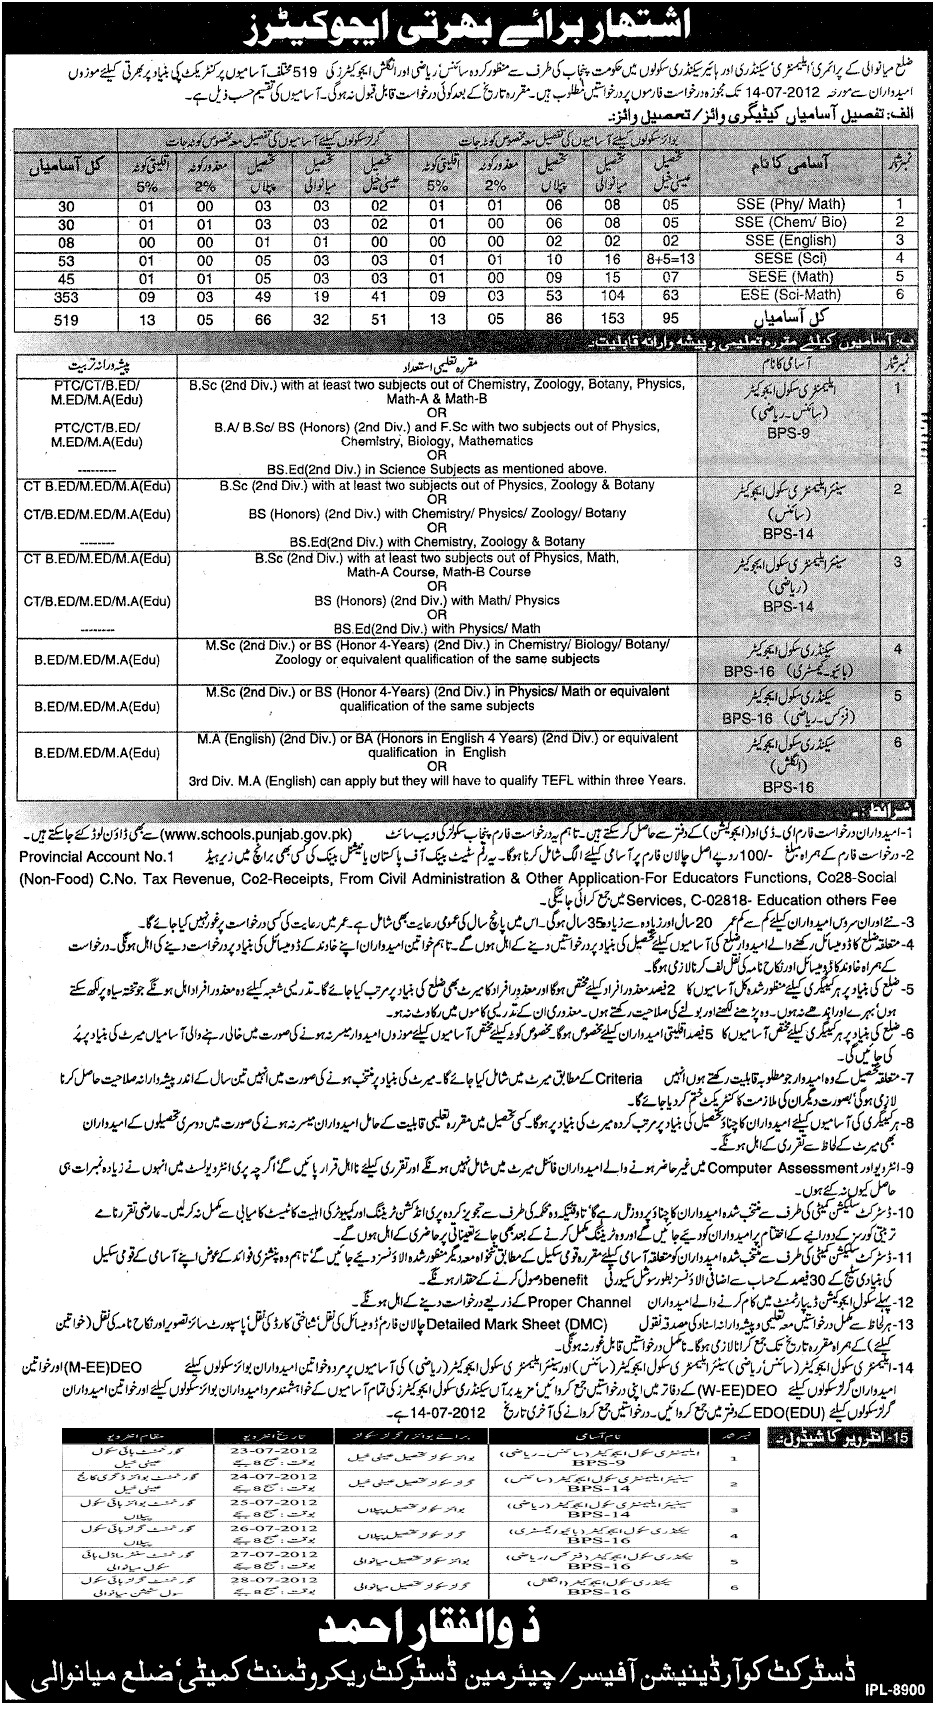 Teachers/Educators Required by Government of Punjab at Primary, Elementary, Secondary and Higher Secondary Schools (Mianwali District) (519 Vacancies) (Govt. Job)